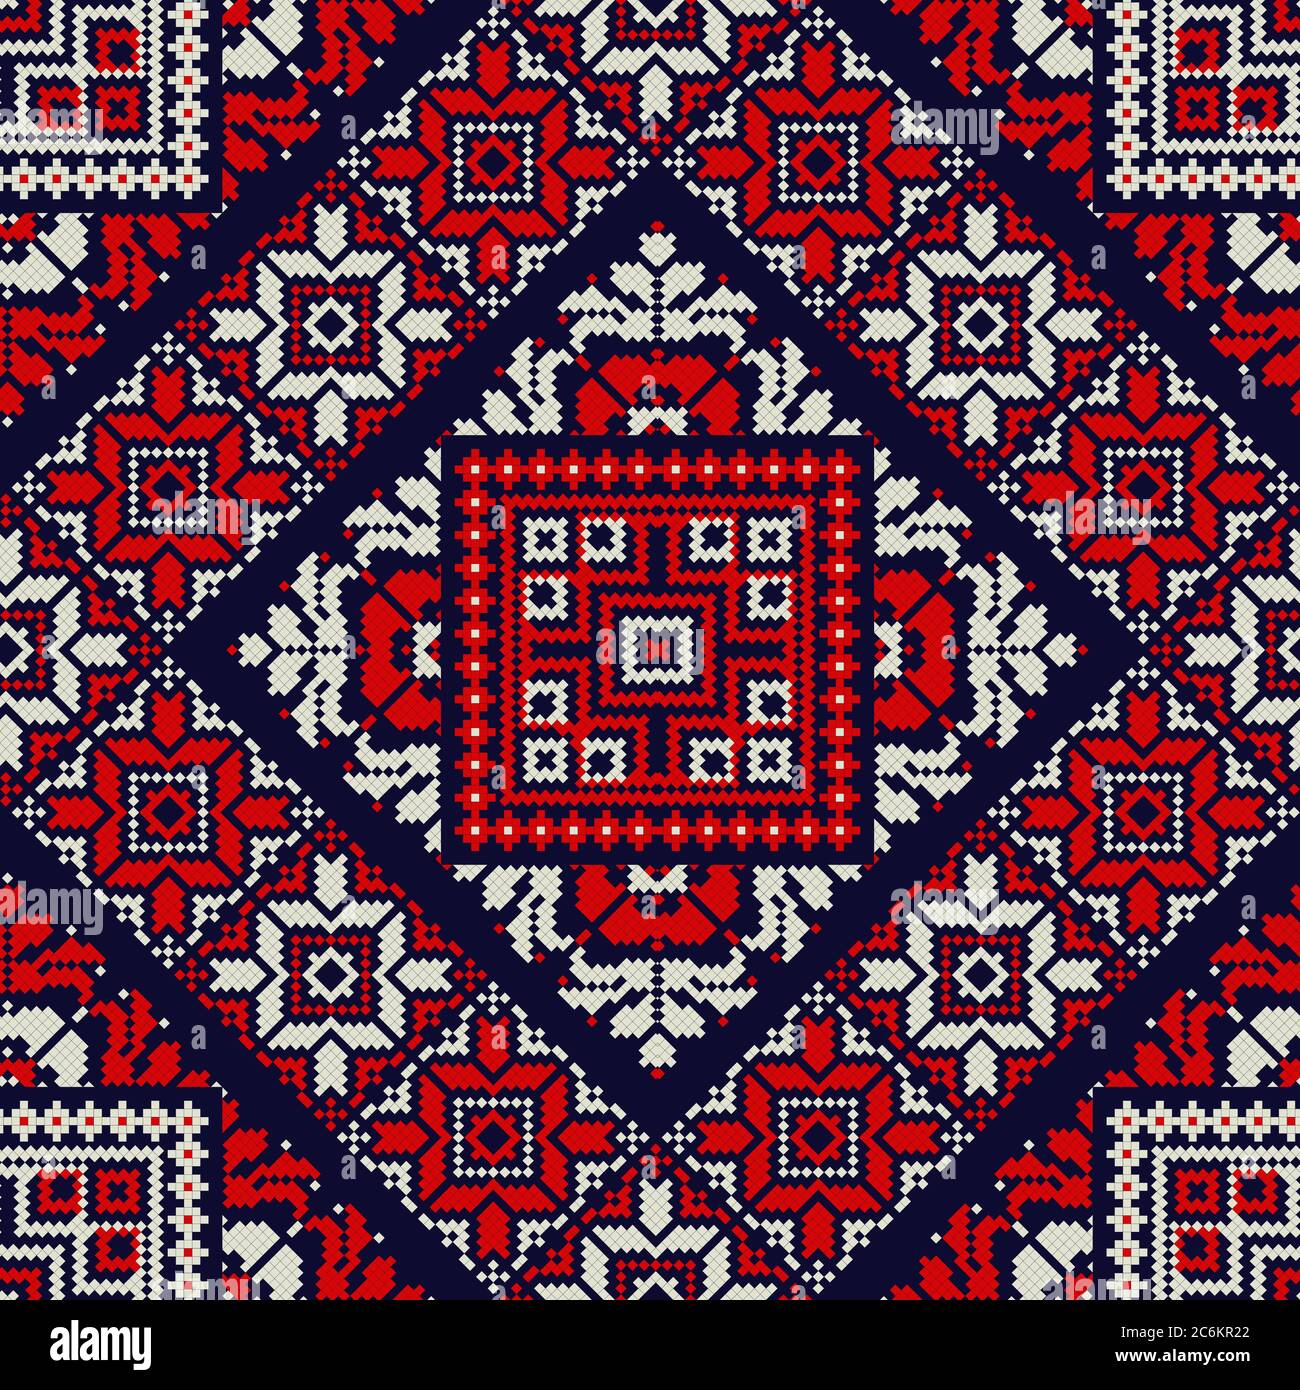 Romanian vector pattern inspired from traditional embroidery Stock ...